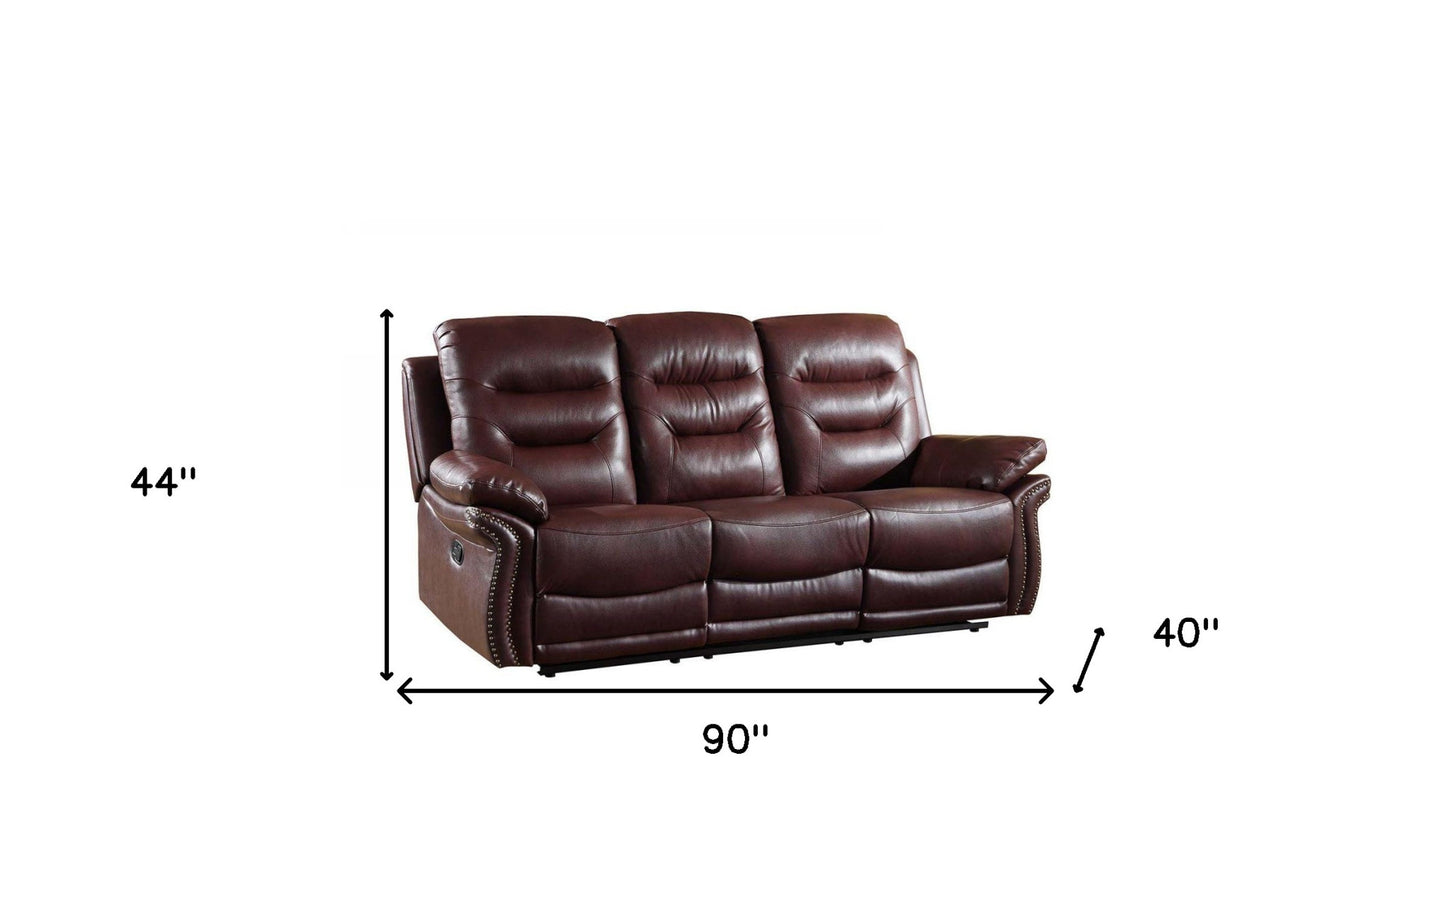 90" Burgundy And Black Faux Leather Sofa